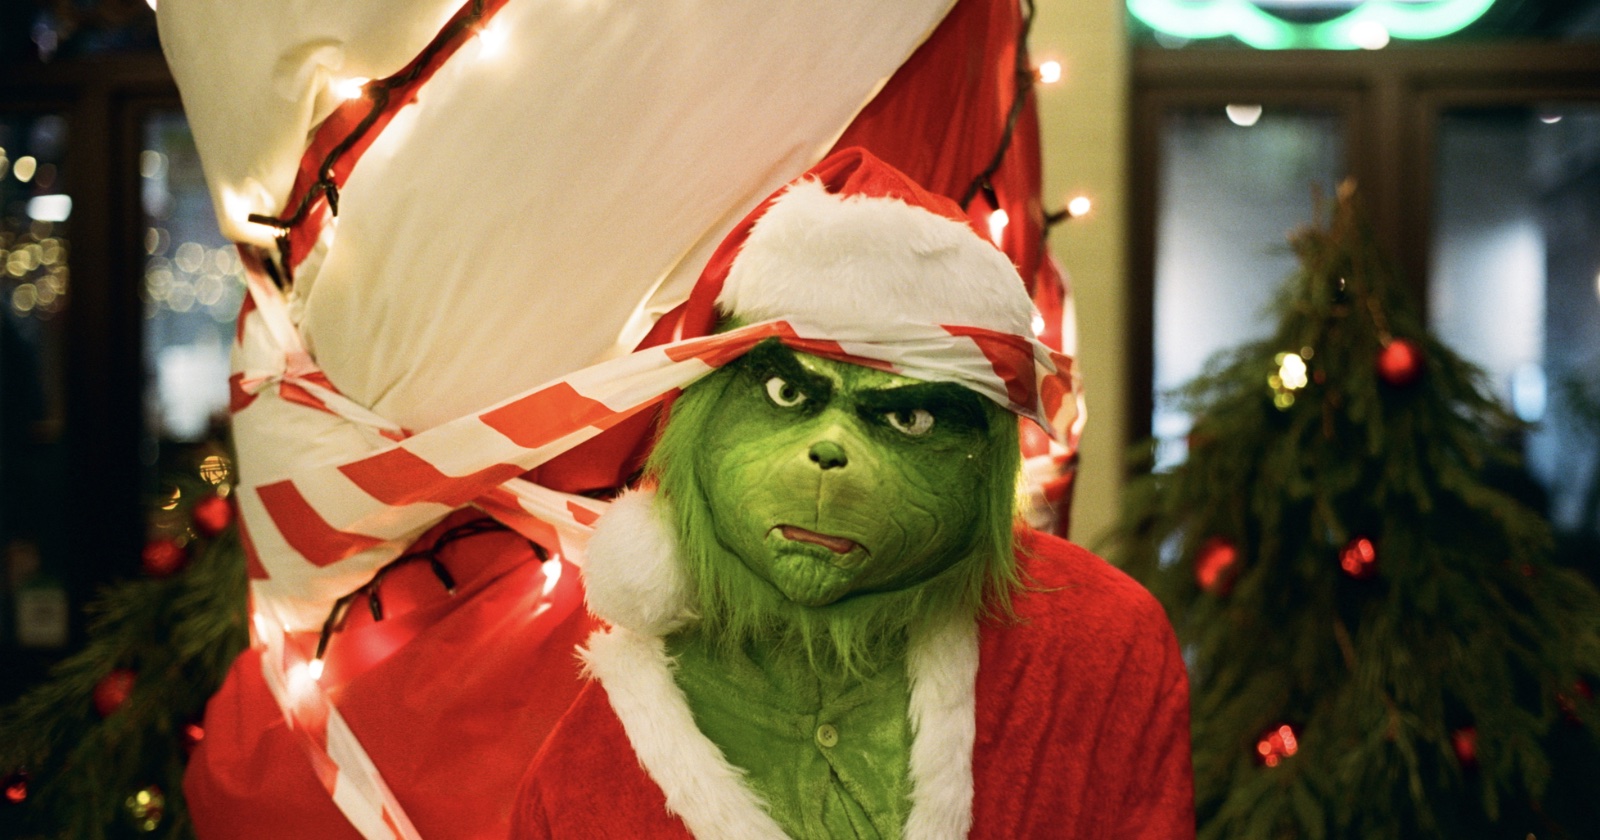  photographers warned they could sued grinch-themed shoots 